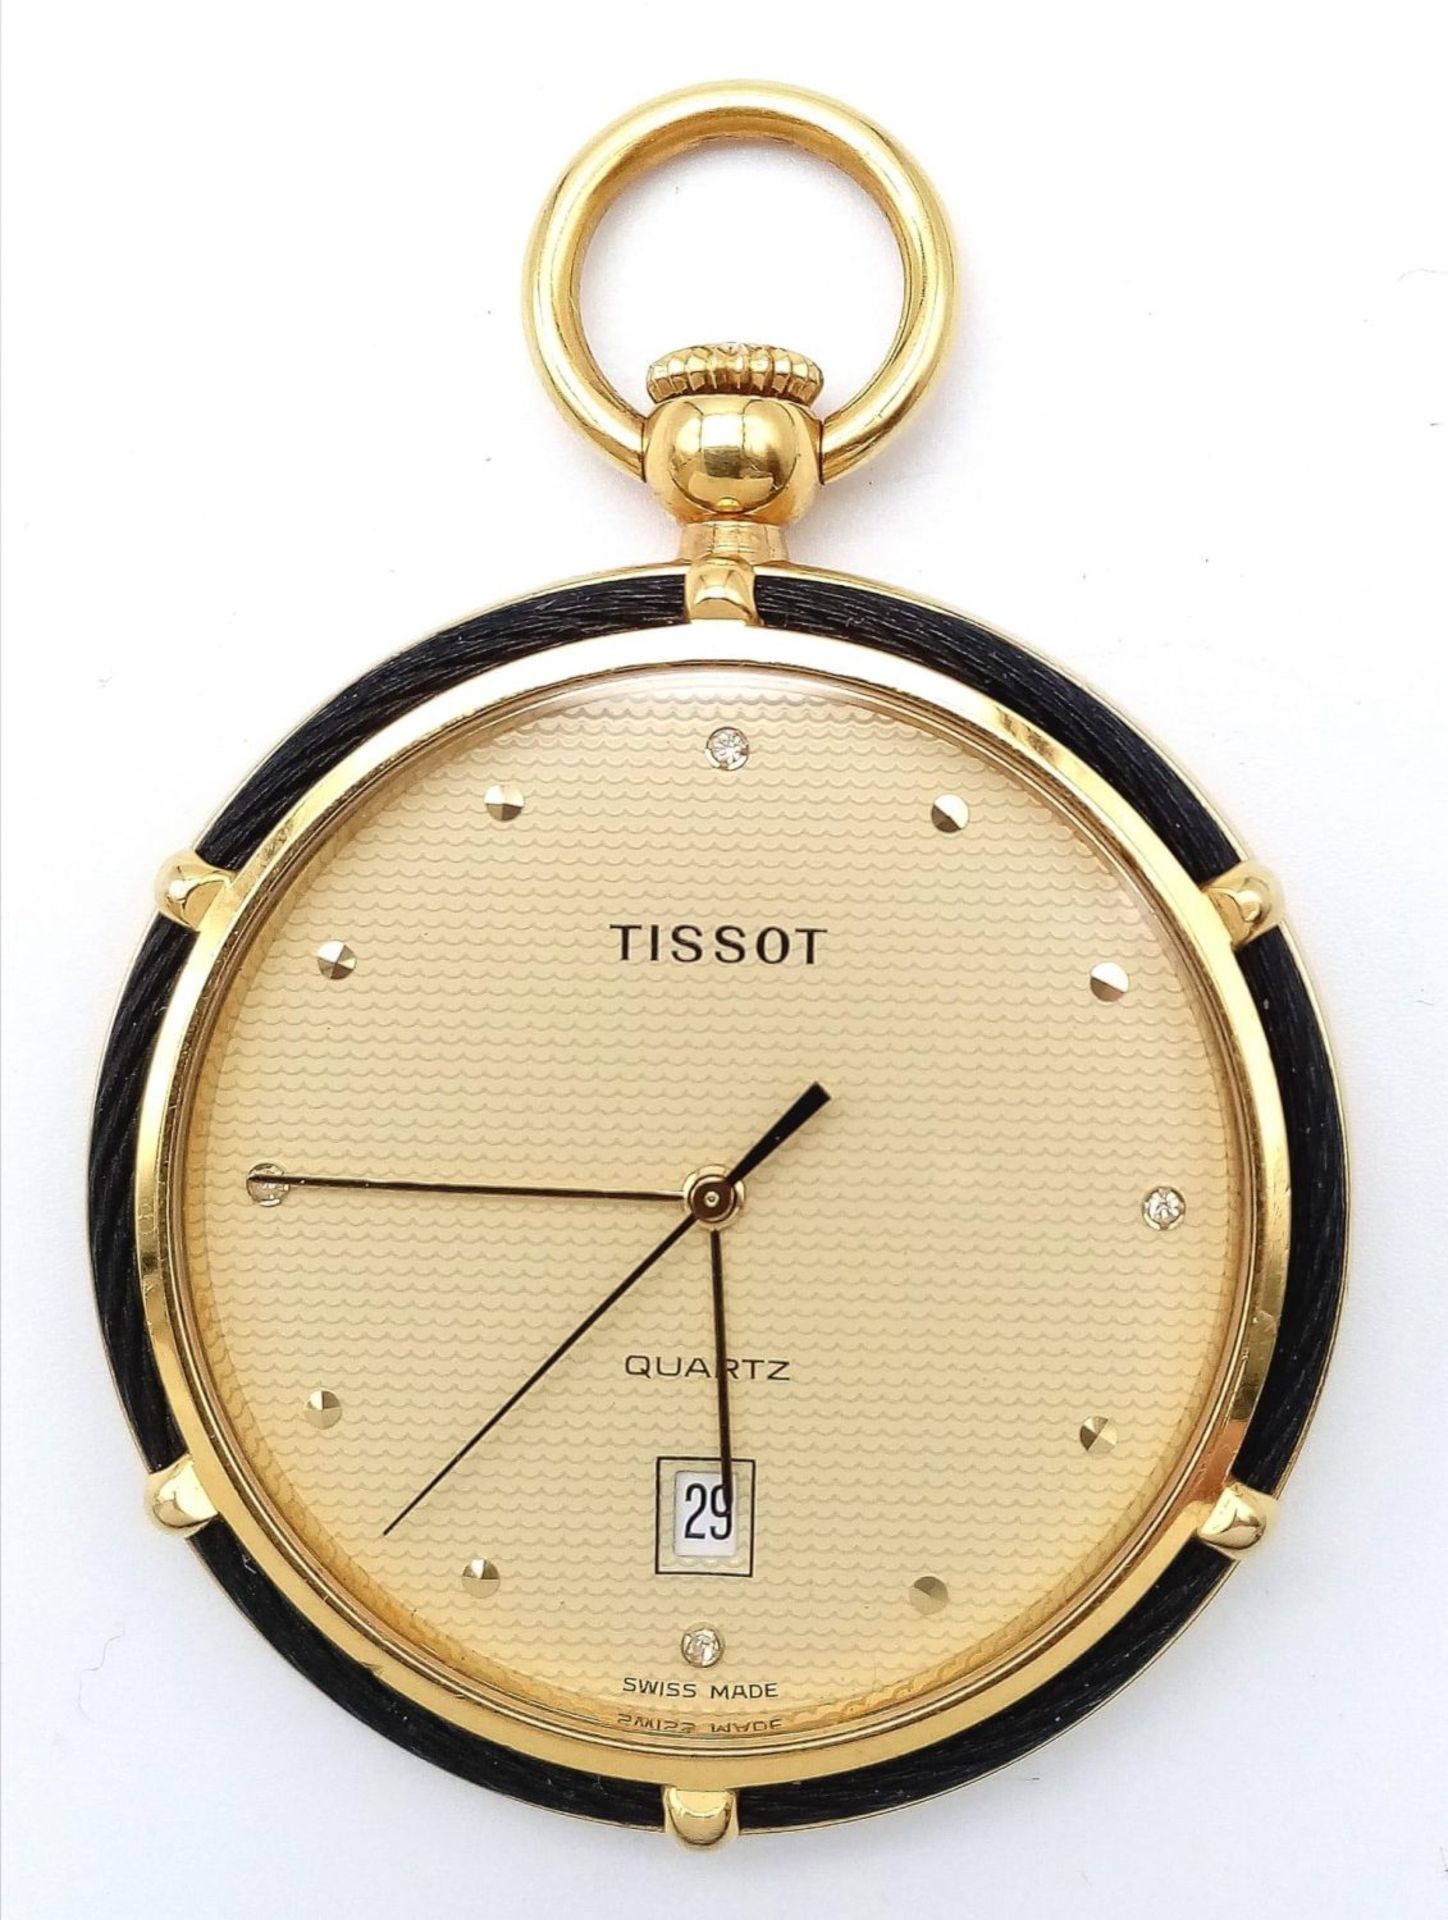 A Tissot Gold Plated Pocket/Pendant Watch. 42mm diameter. Gilded dial with date window. Quartz